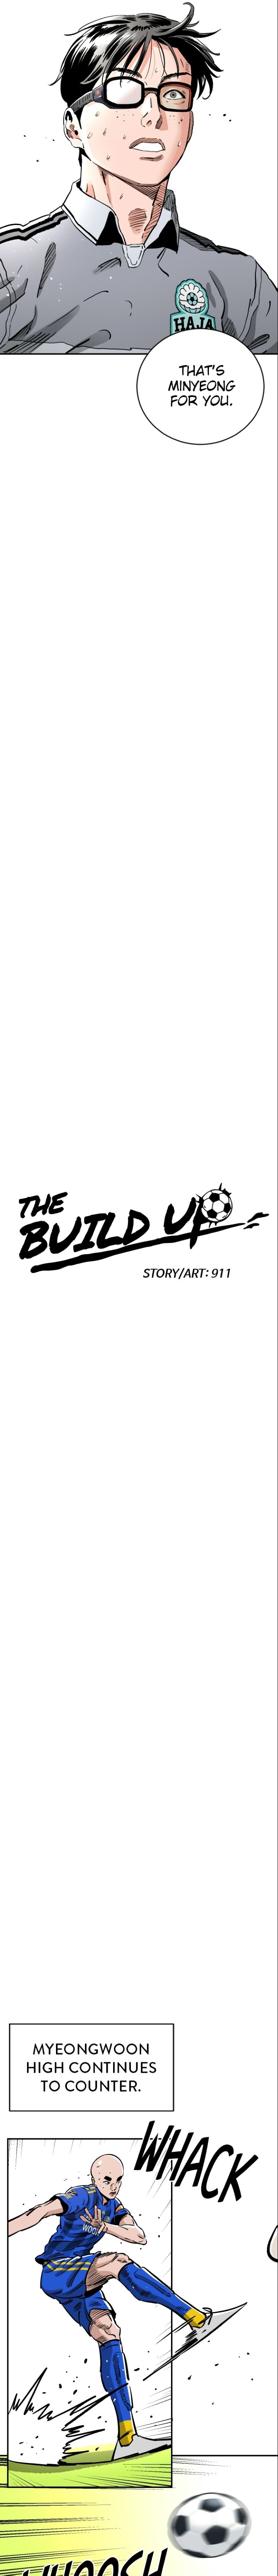 build_up_91_8